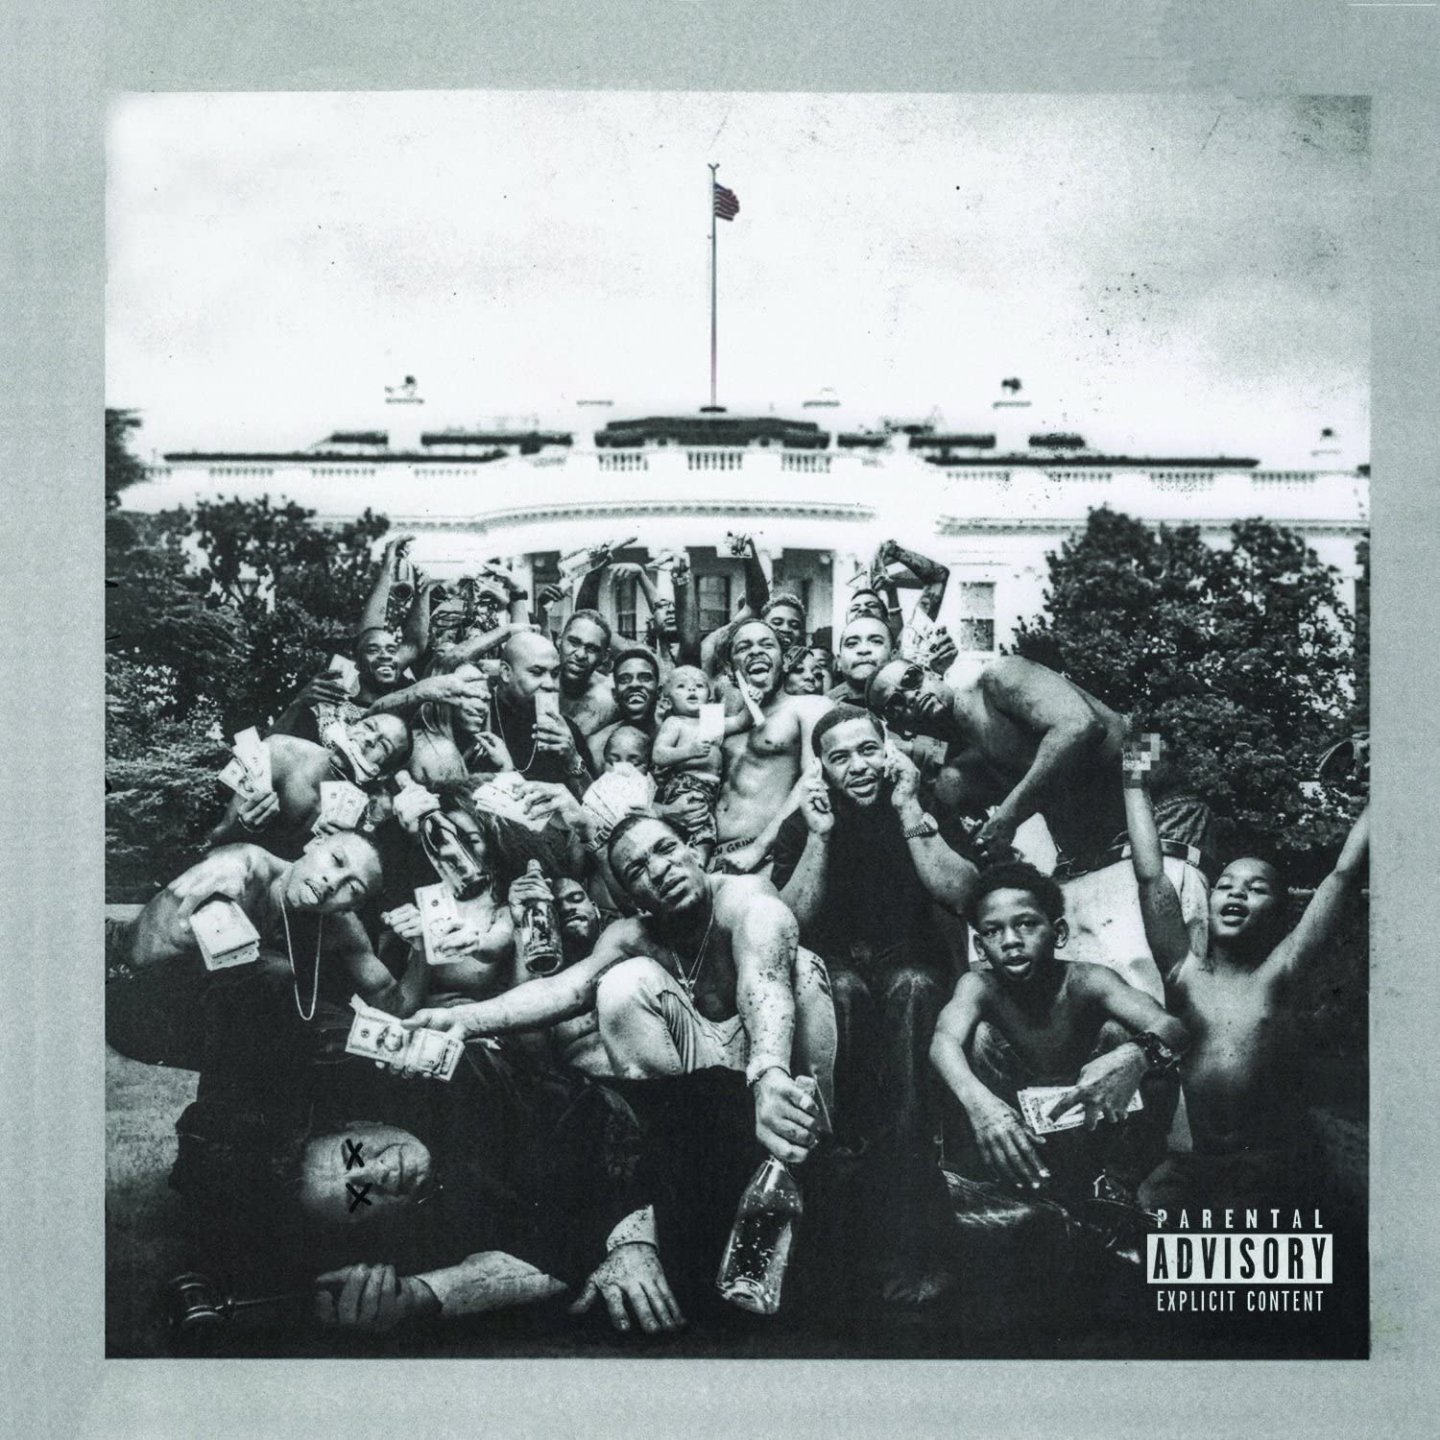 7. Kendrick Lamar – To Pimp a Butterfly